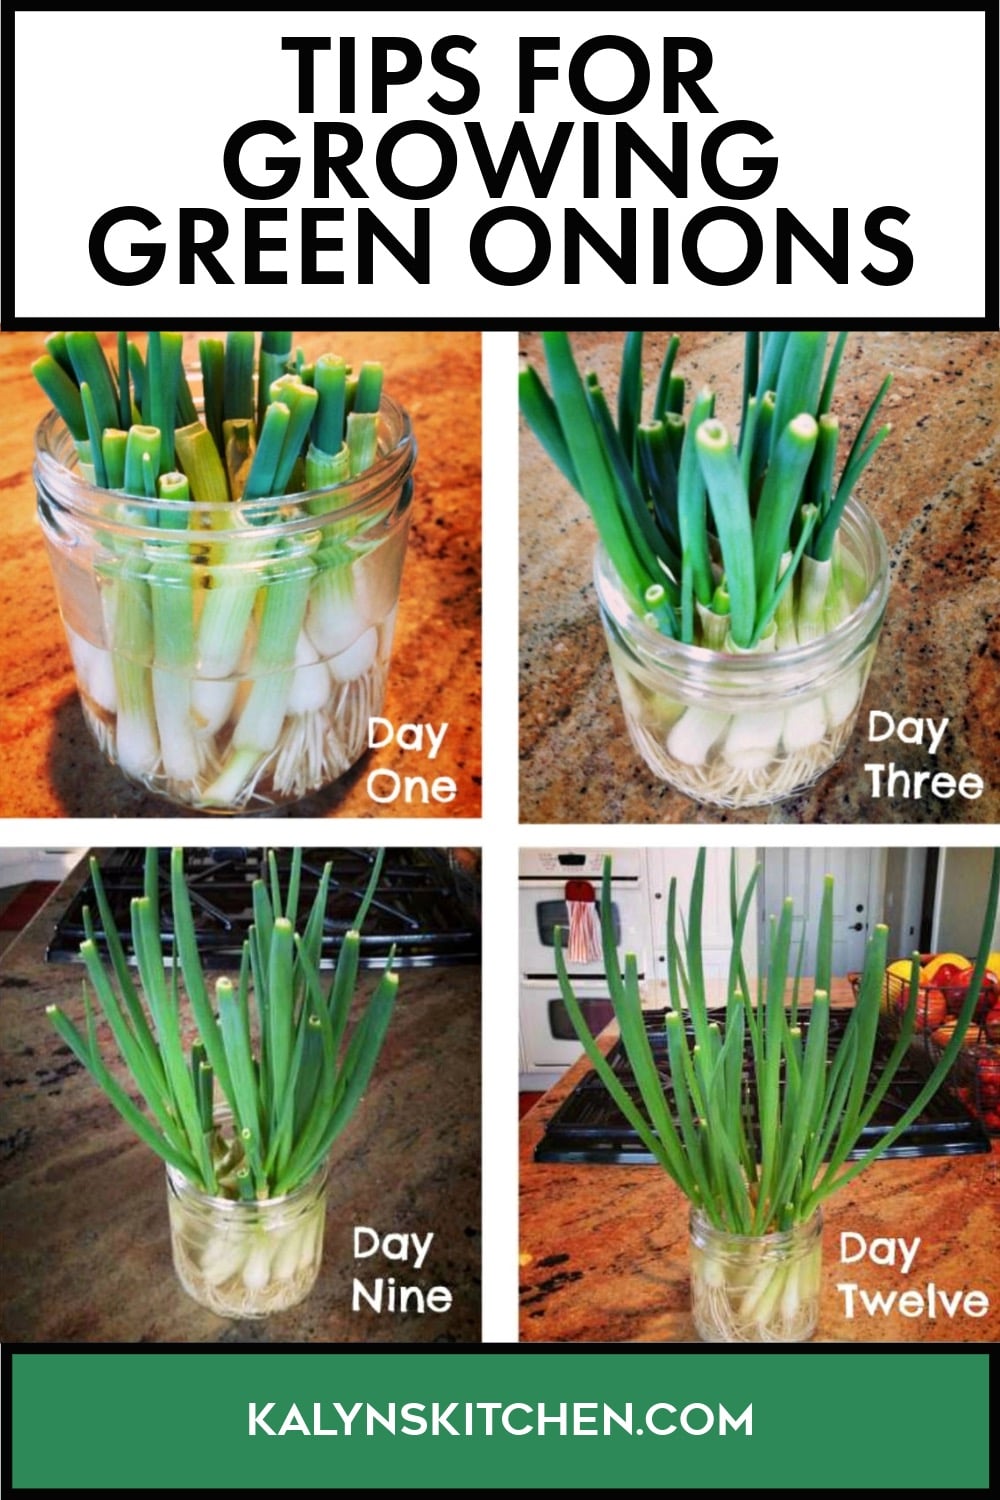 Pinterest image of Tips for Growing Green Onions